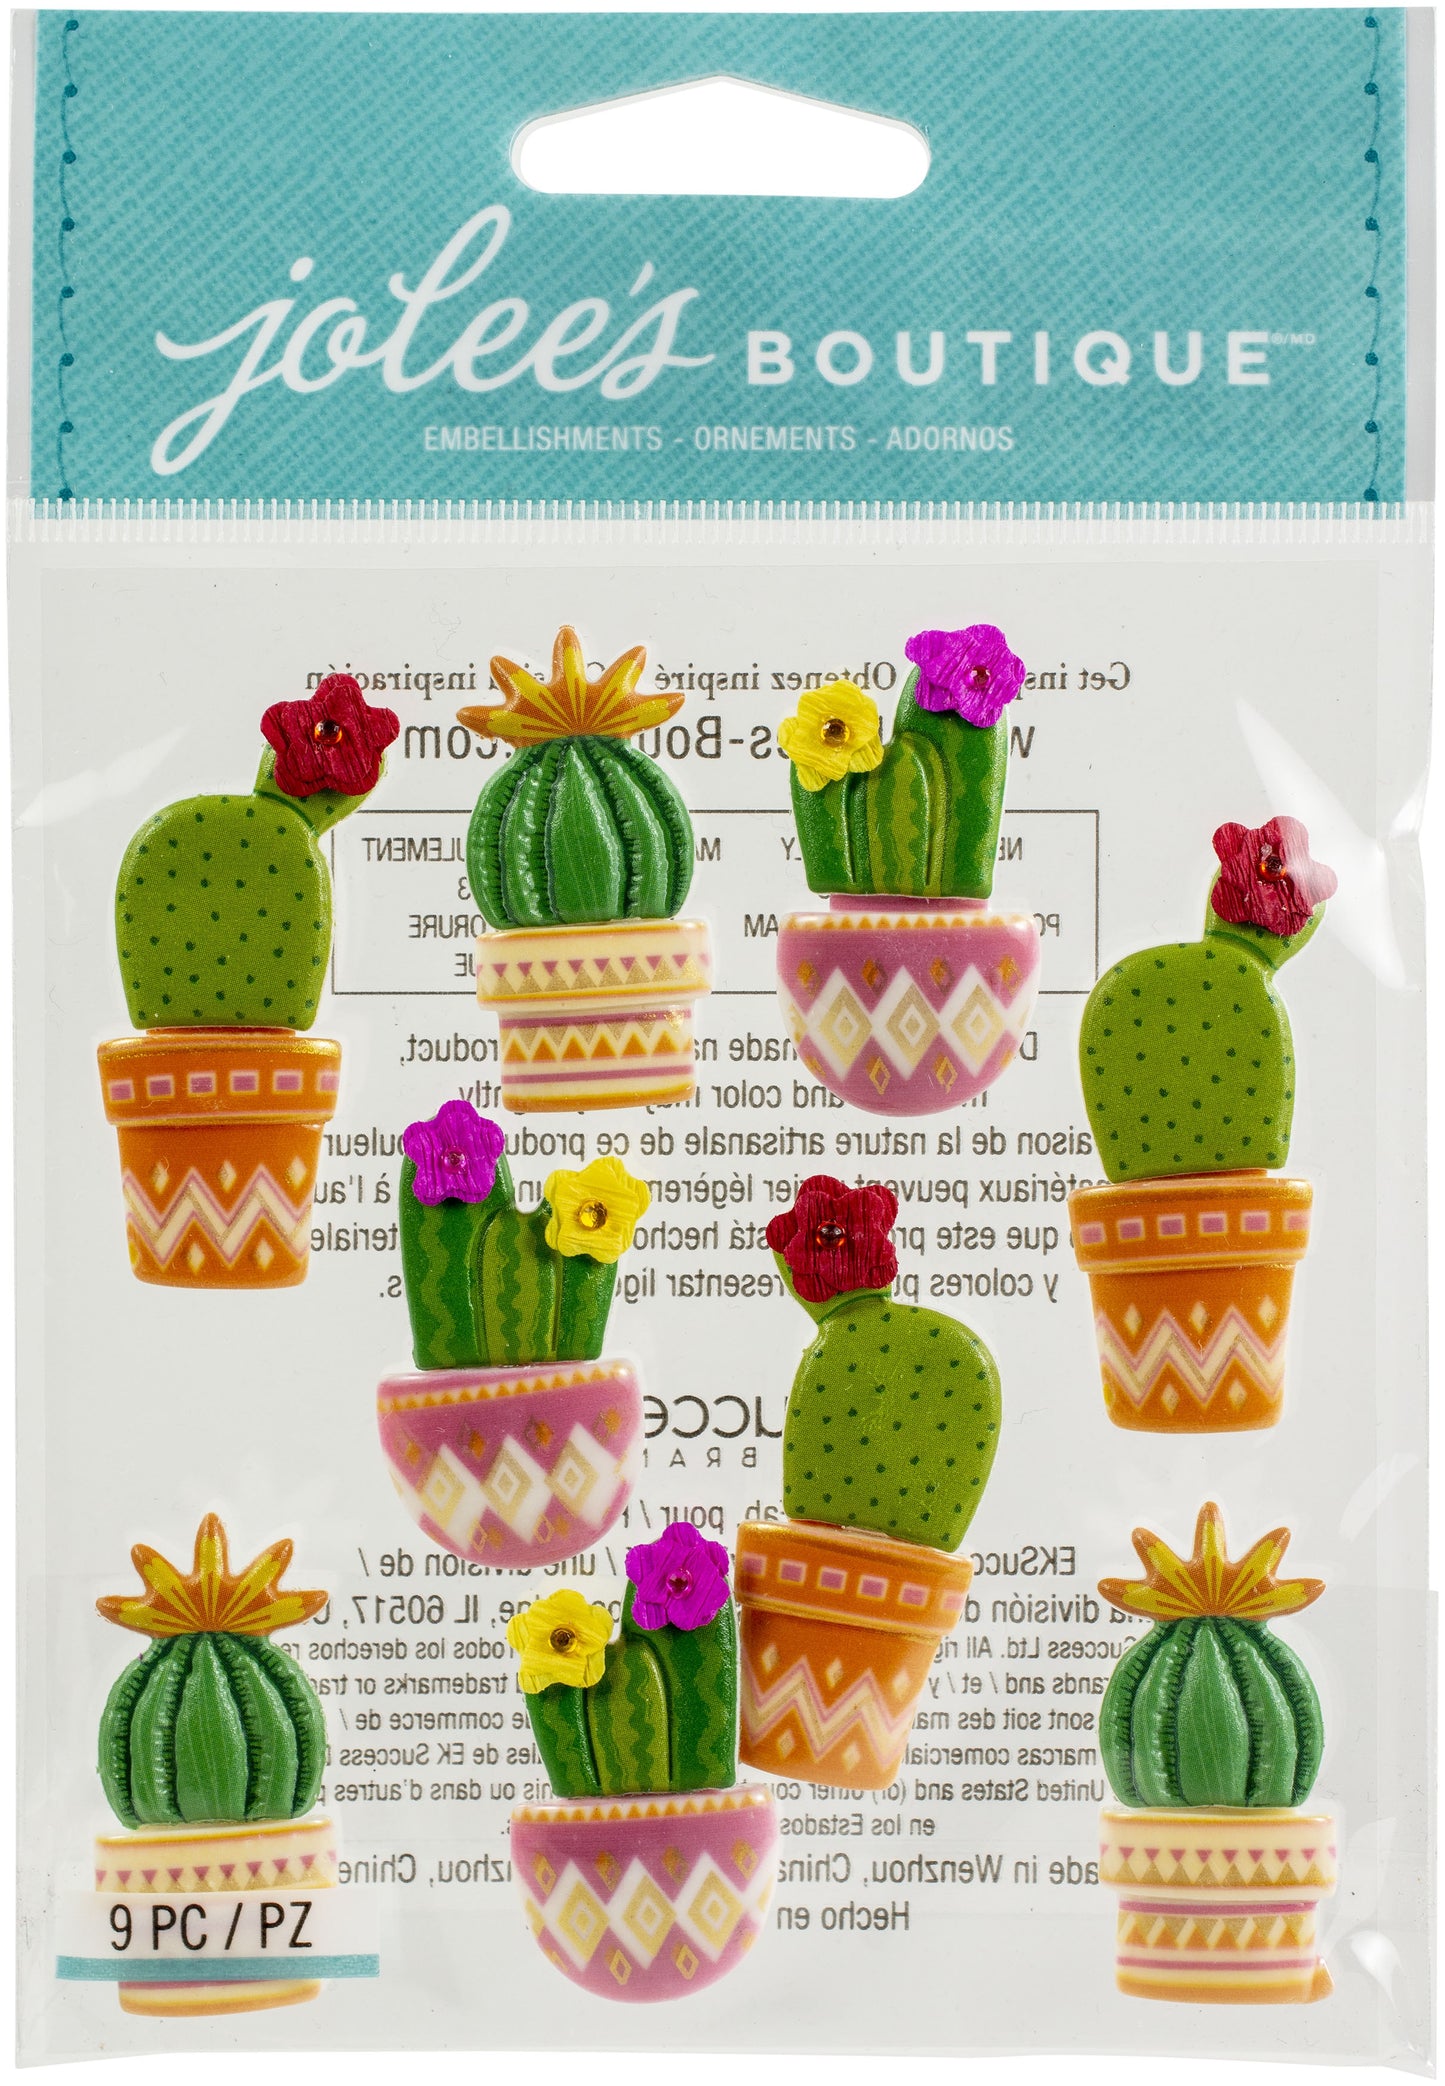 Jolee's Boutique Themed Embellishment-Cacti Repeats